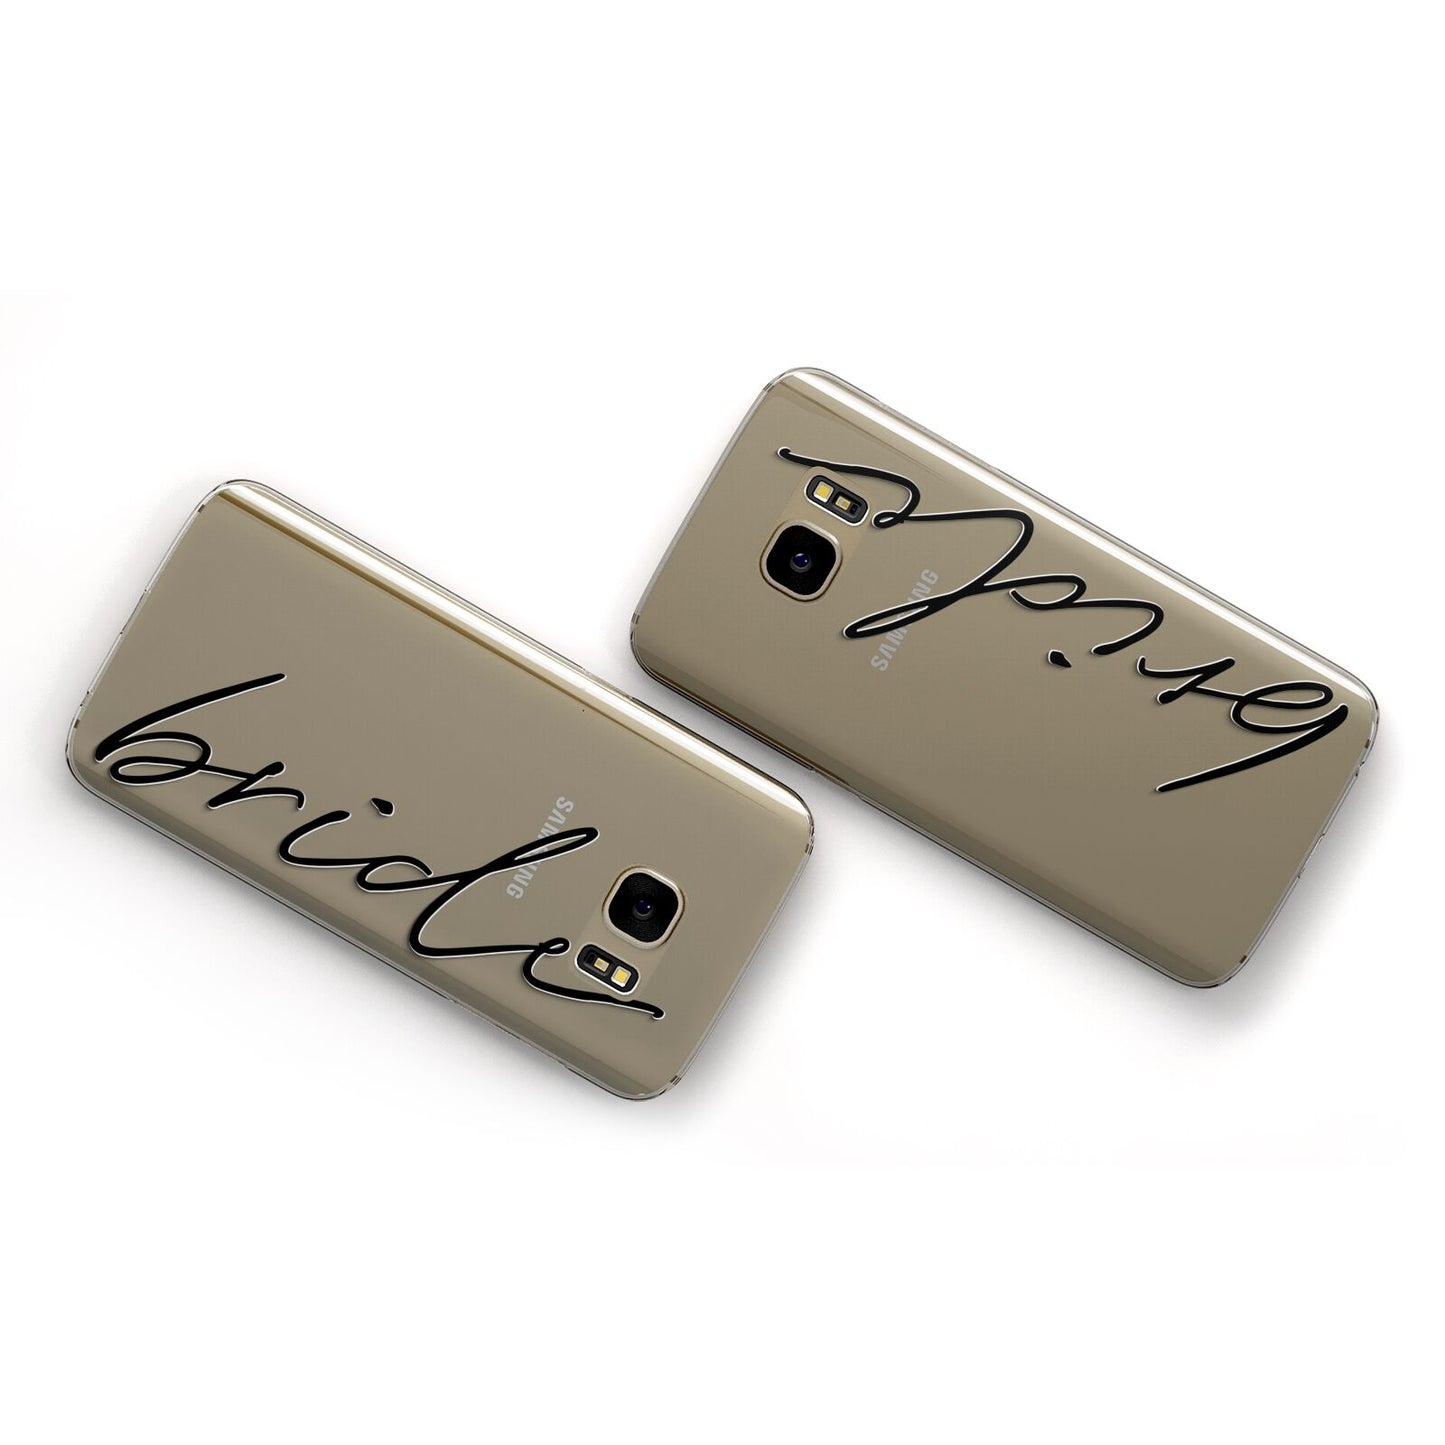 The Bride Samsung Galaxy Case Flat Overview